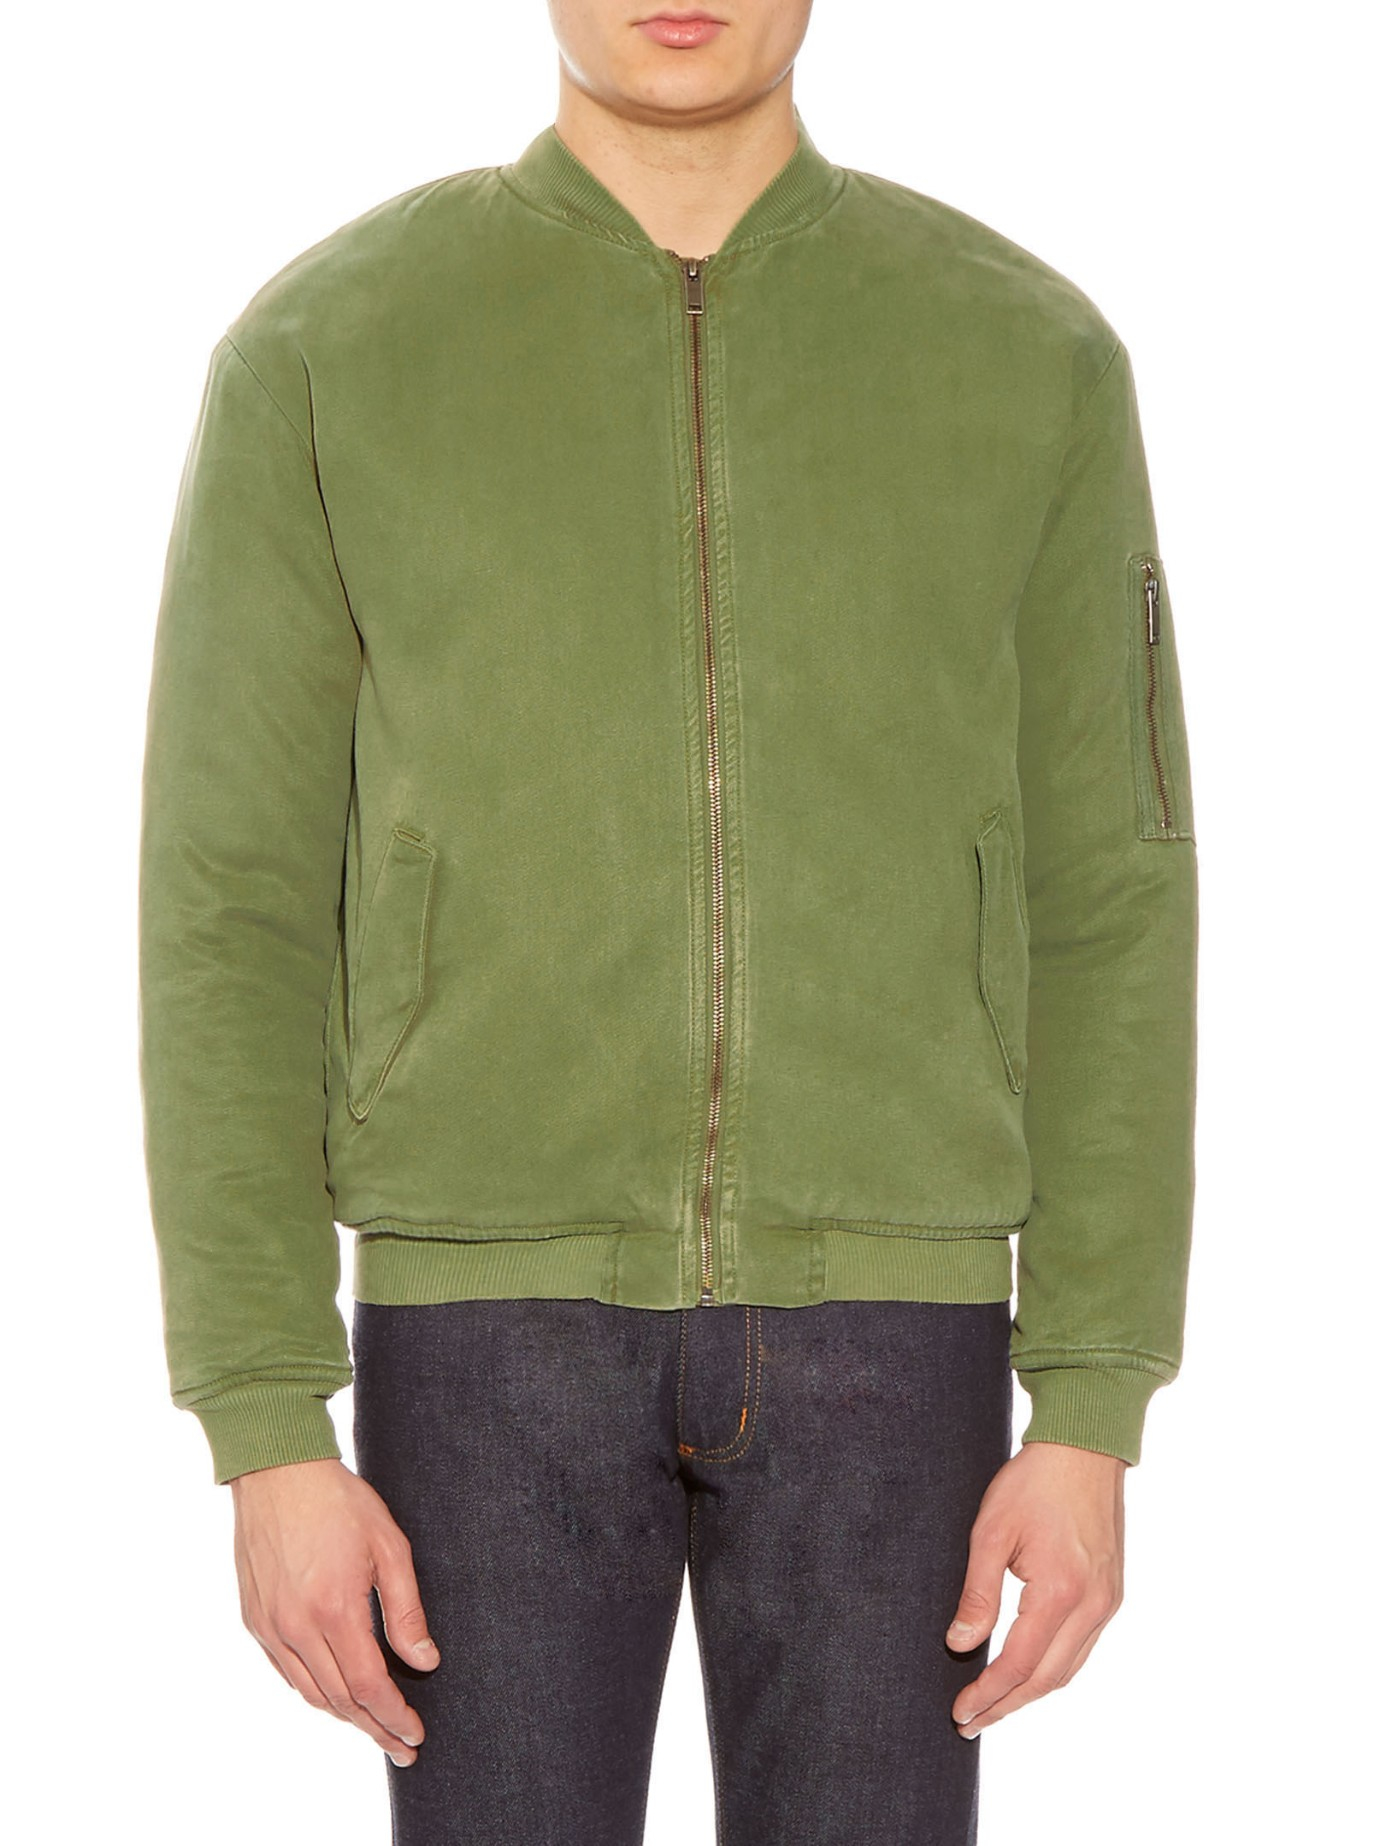 Lyst - American Vintage Military Padded Twill Bomber Jacket in Green ...